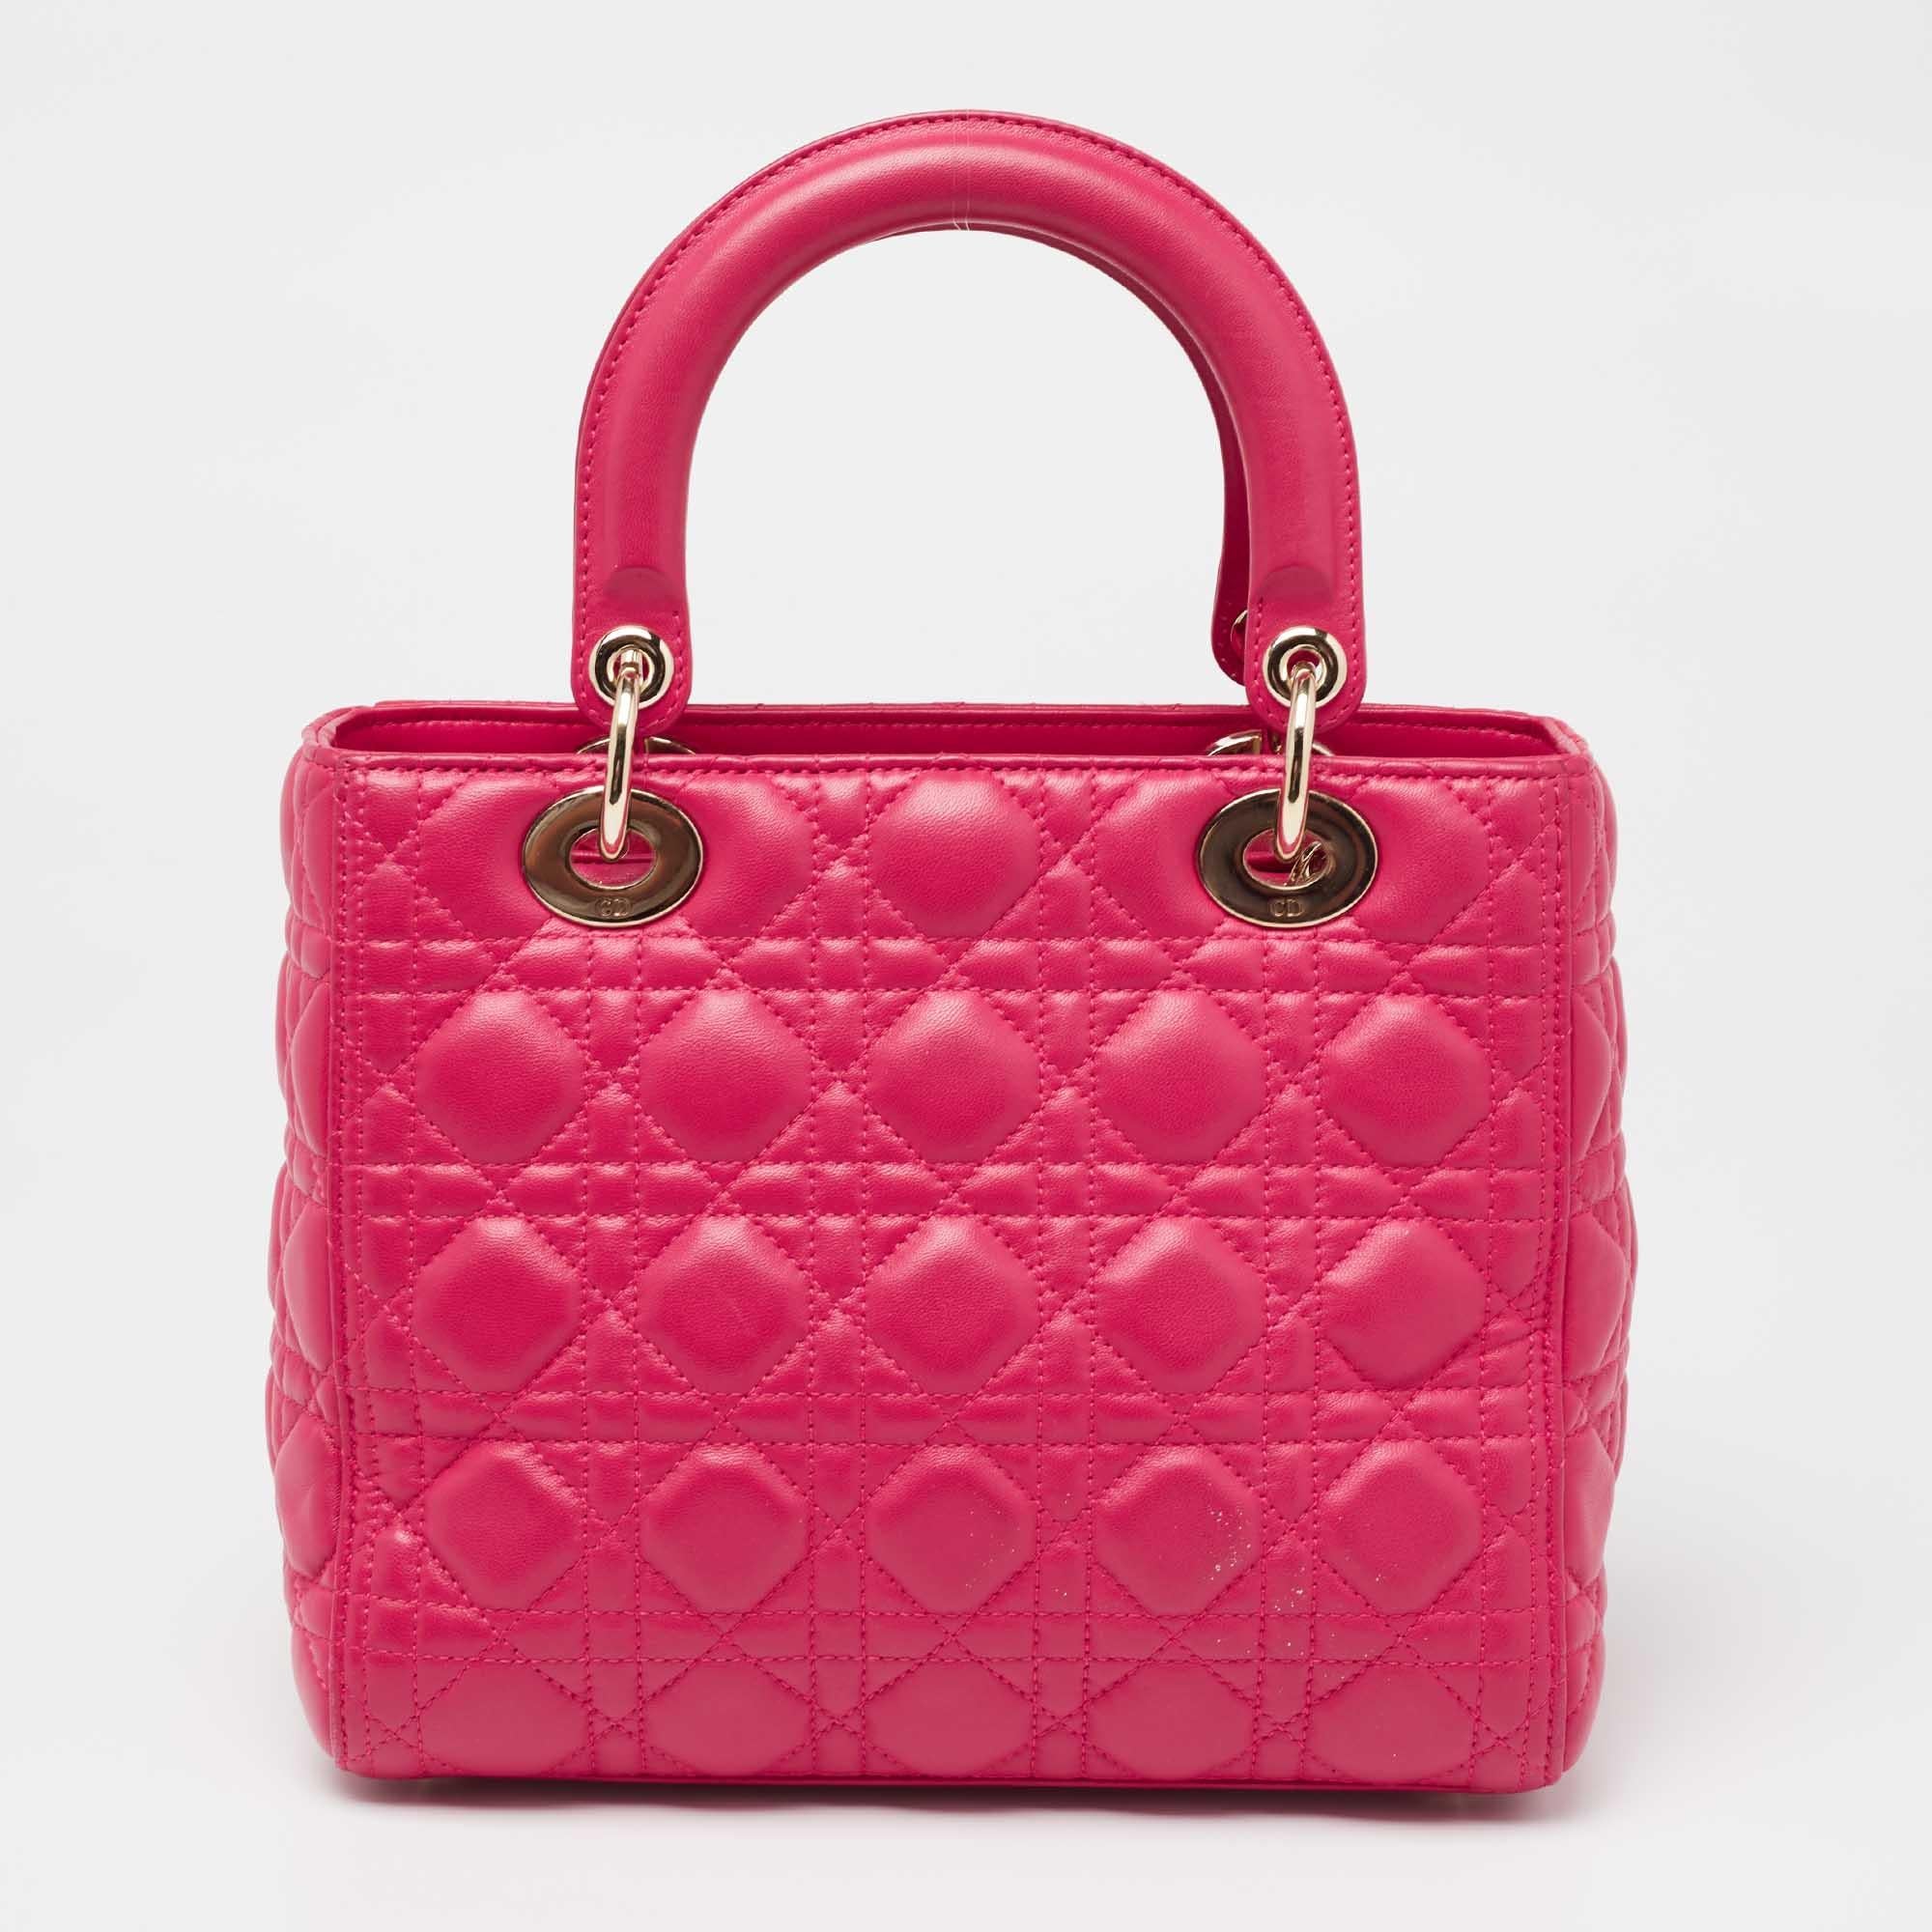 The Lady Dior tote is a Dior creation that has gained wide recognition and is a coveted bag that every fashionista craves to possess. This pink tote has been crafted from leather and carries the signature Cannage quilt. It is equipped with a fabric